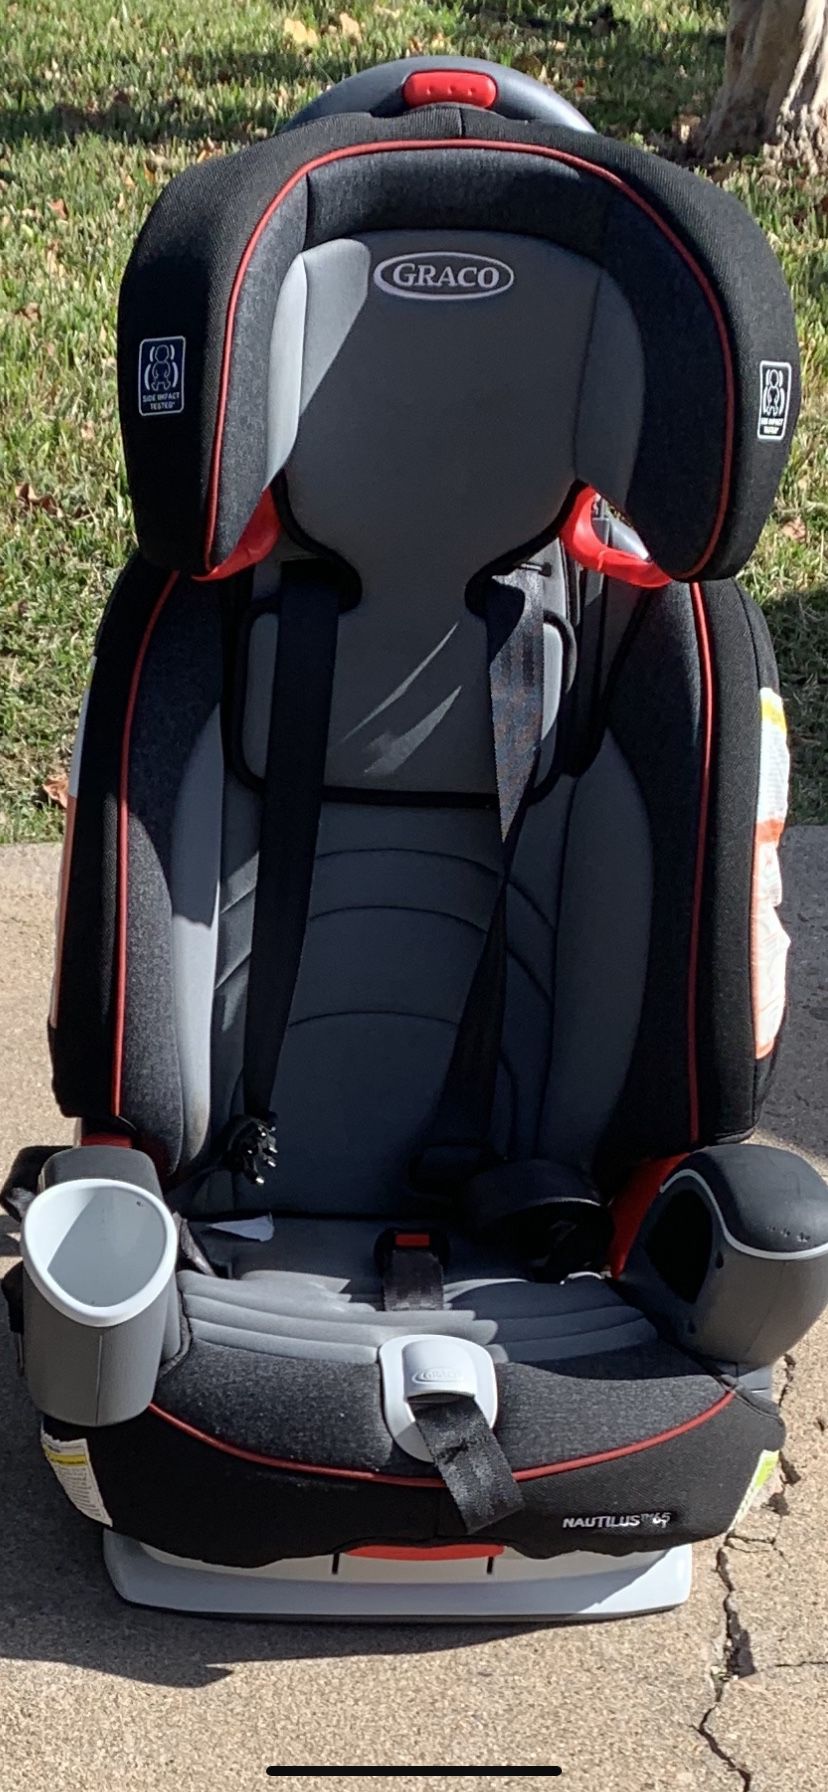 Graco car seat - 3 positions